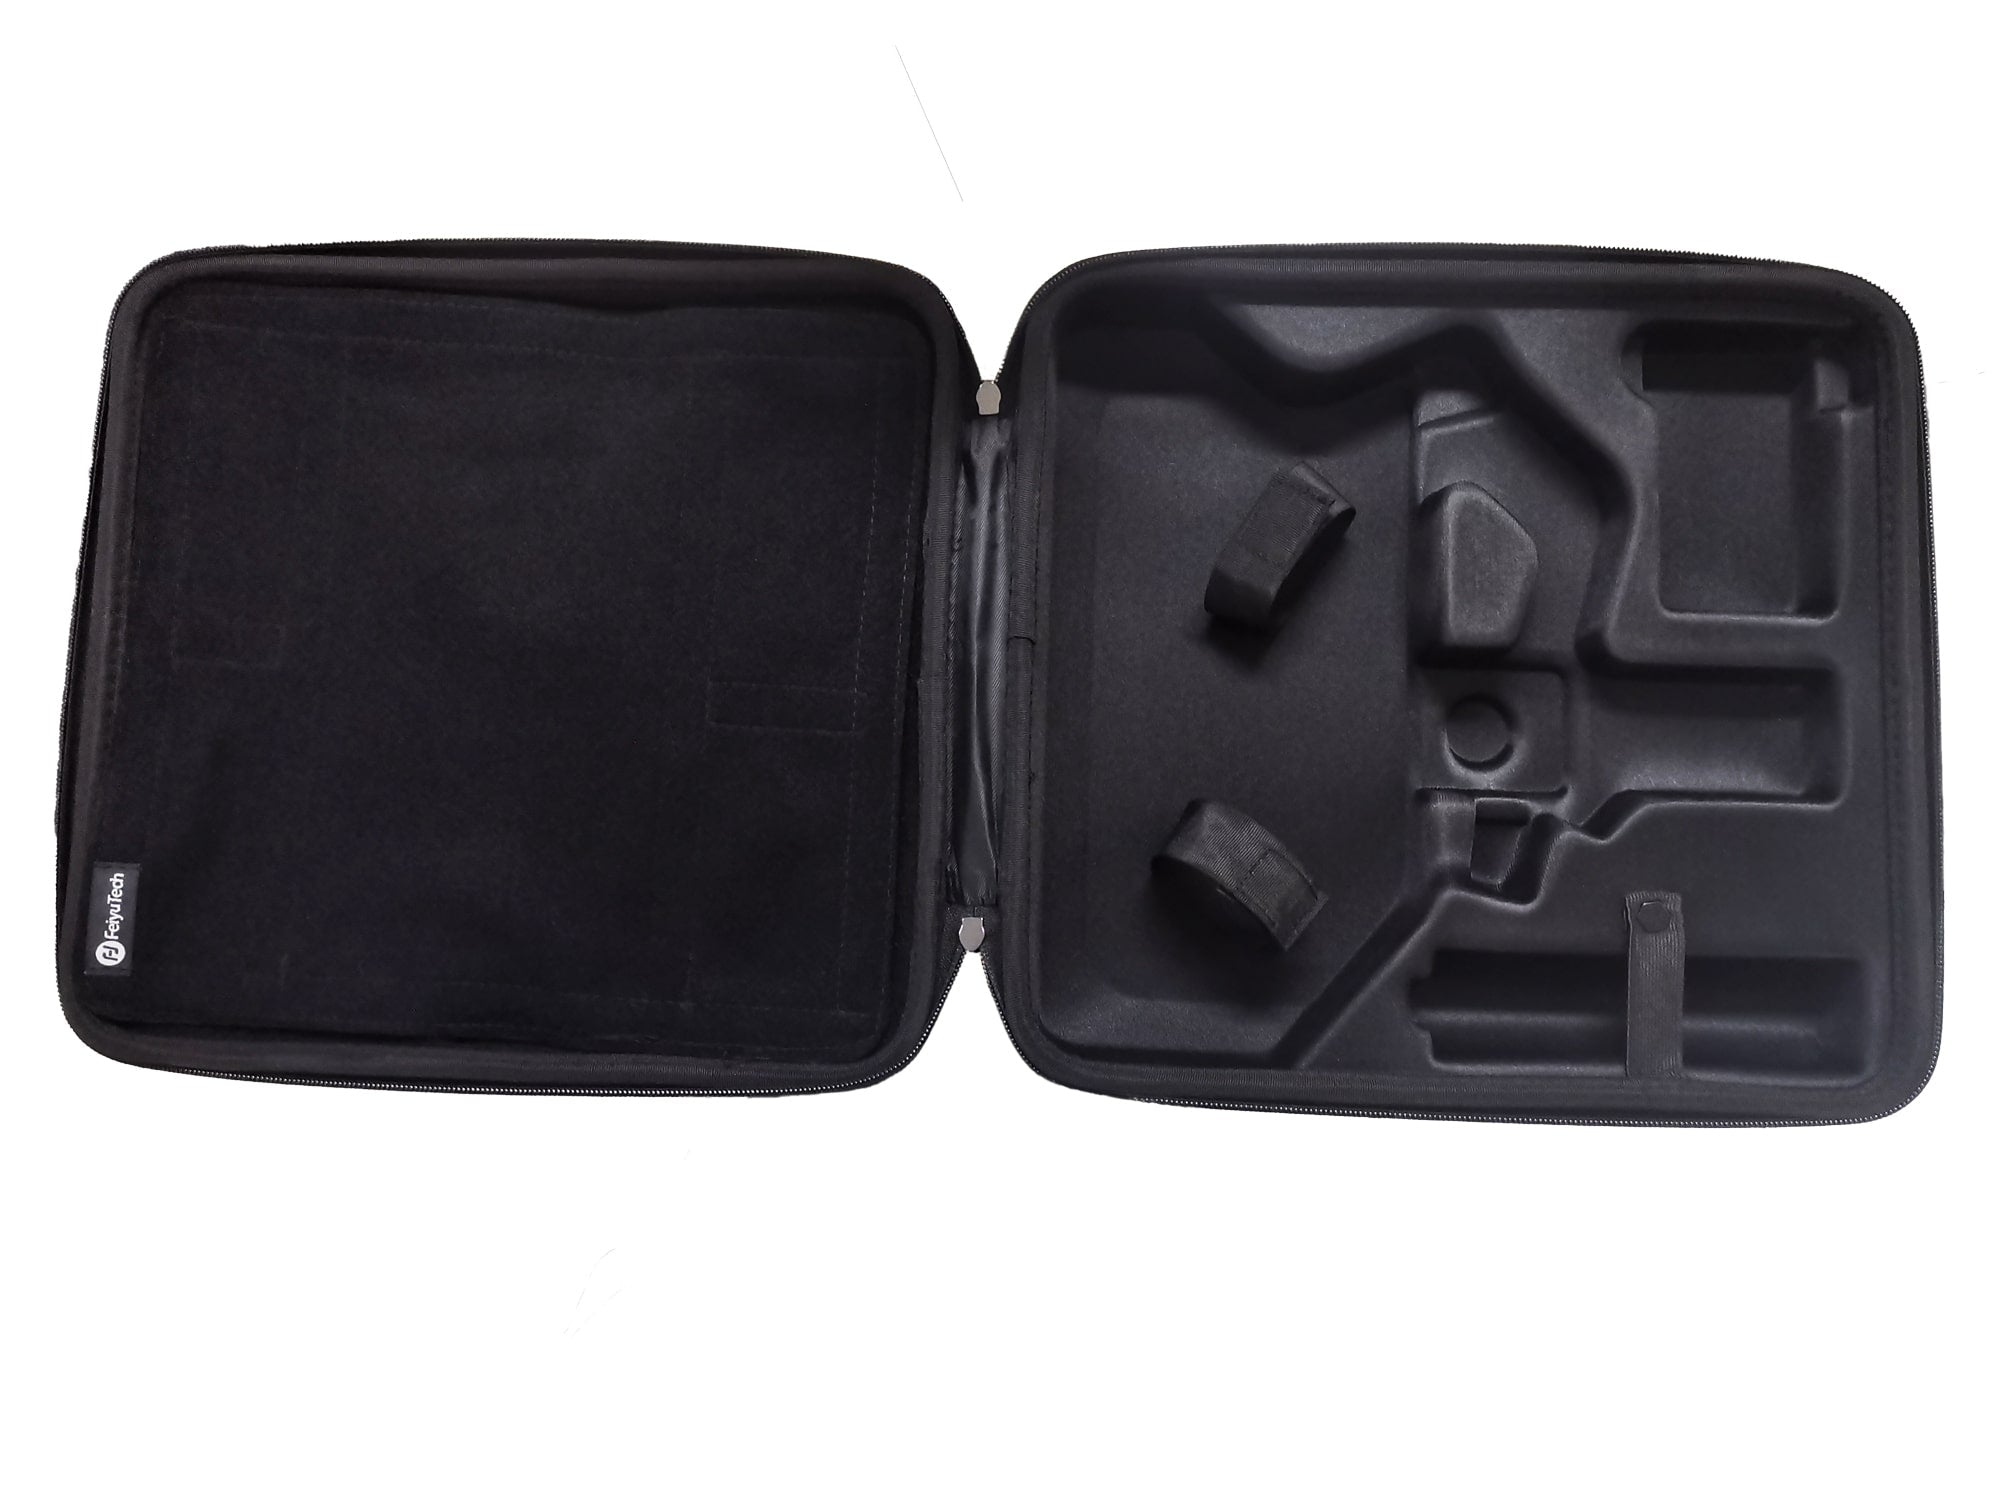 Carrying Case Portable Bag for SCORP Mini Series